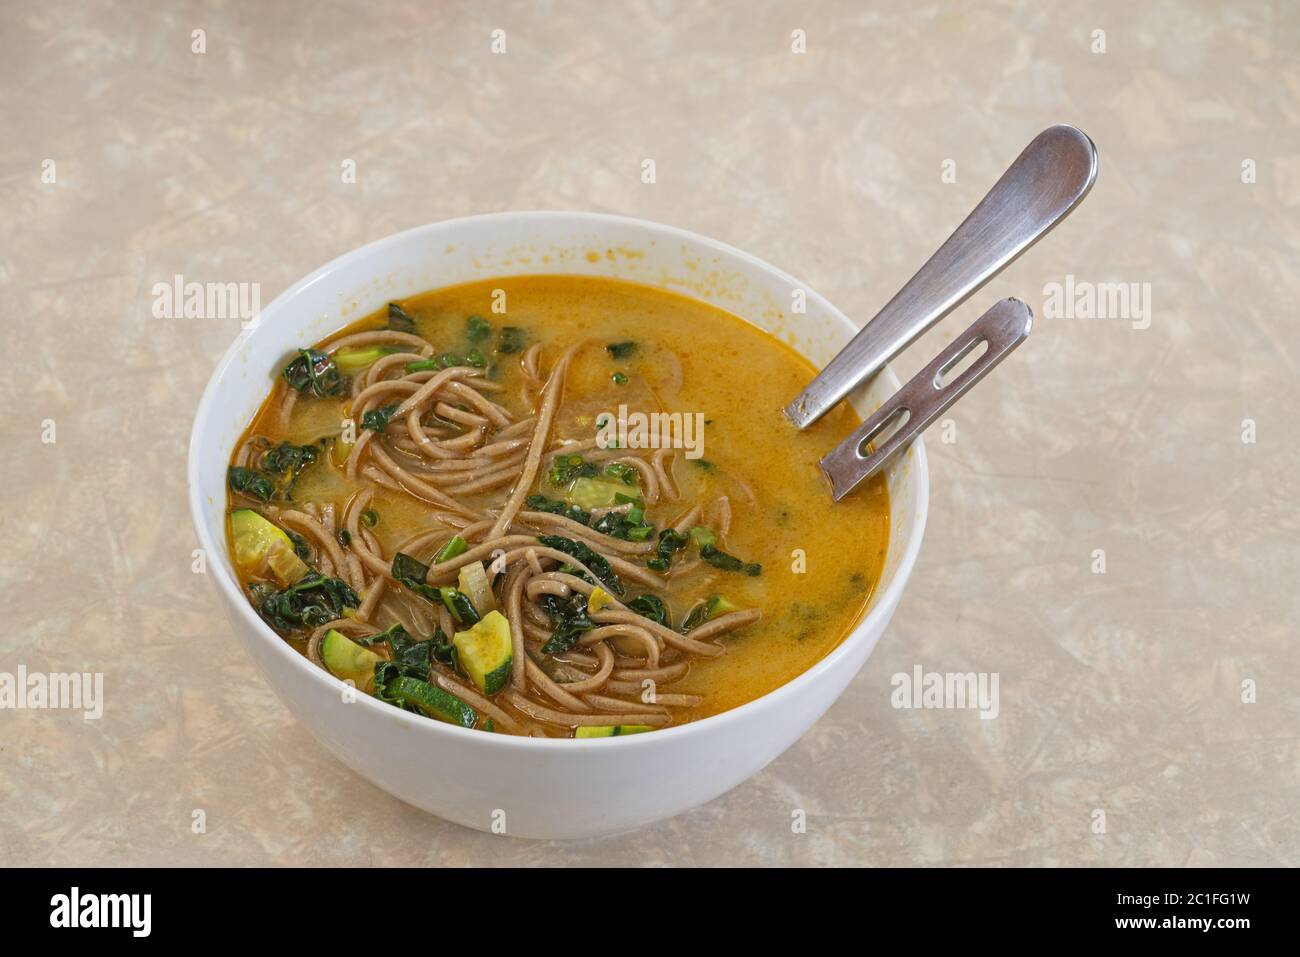 bowl of homemade soup with rich broth vegetables and soba noodles Stock Photo